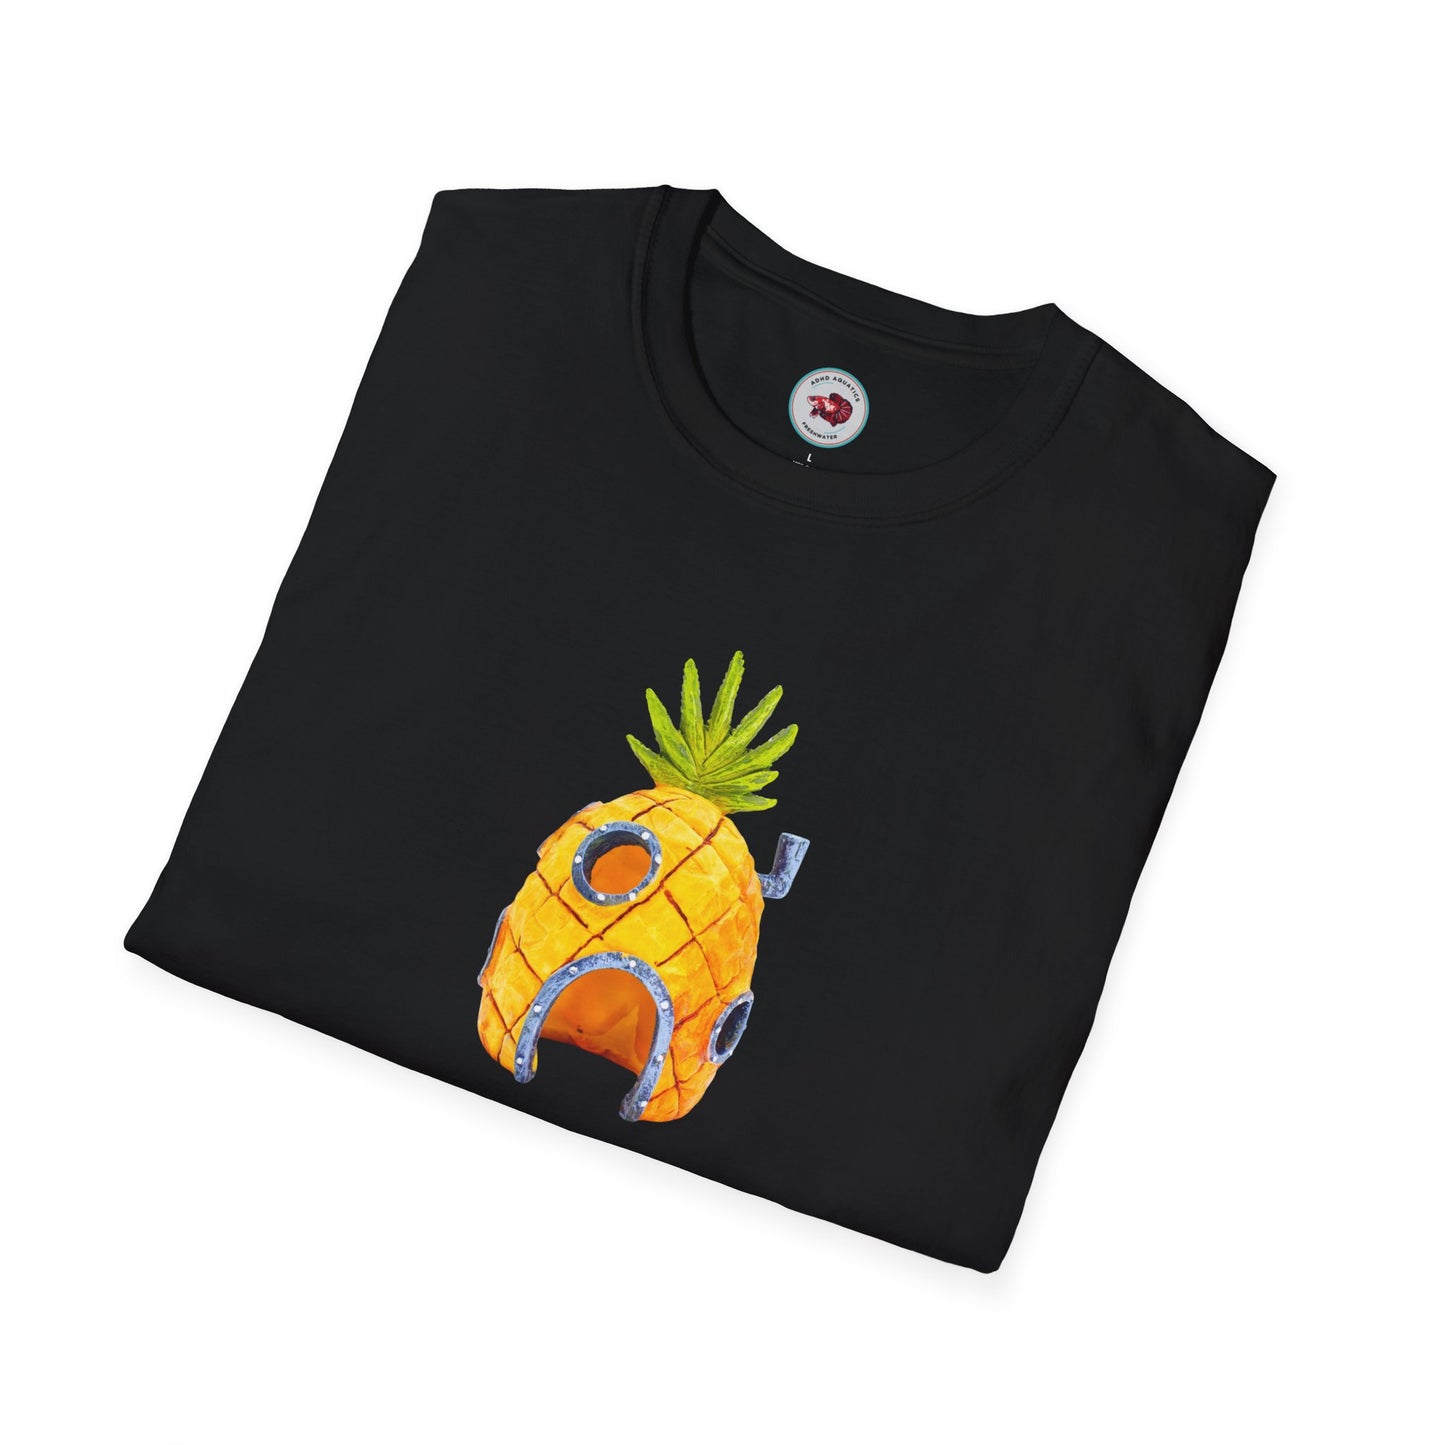 That Dreaded Pineapple Is At It Again Unisex Softstyle T-Shirt by ADHD Aquatics